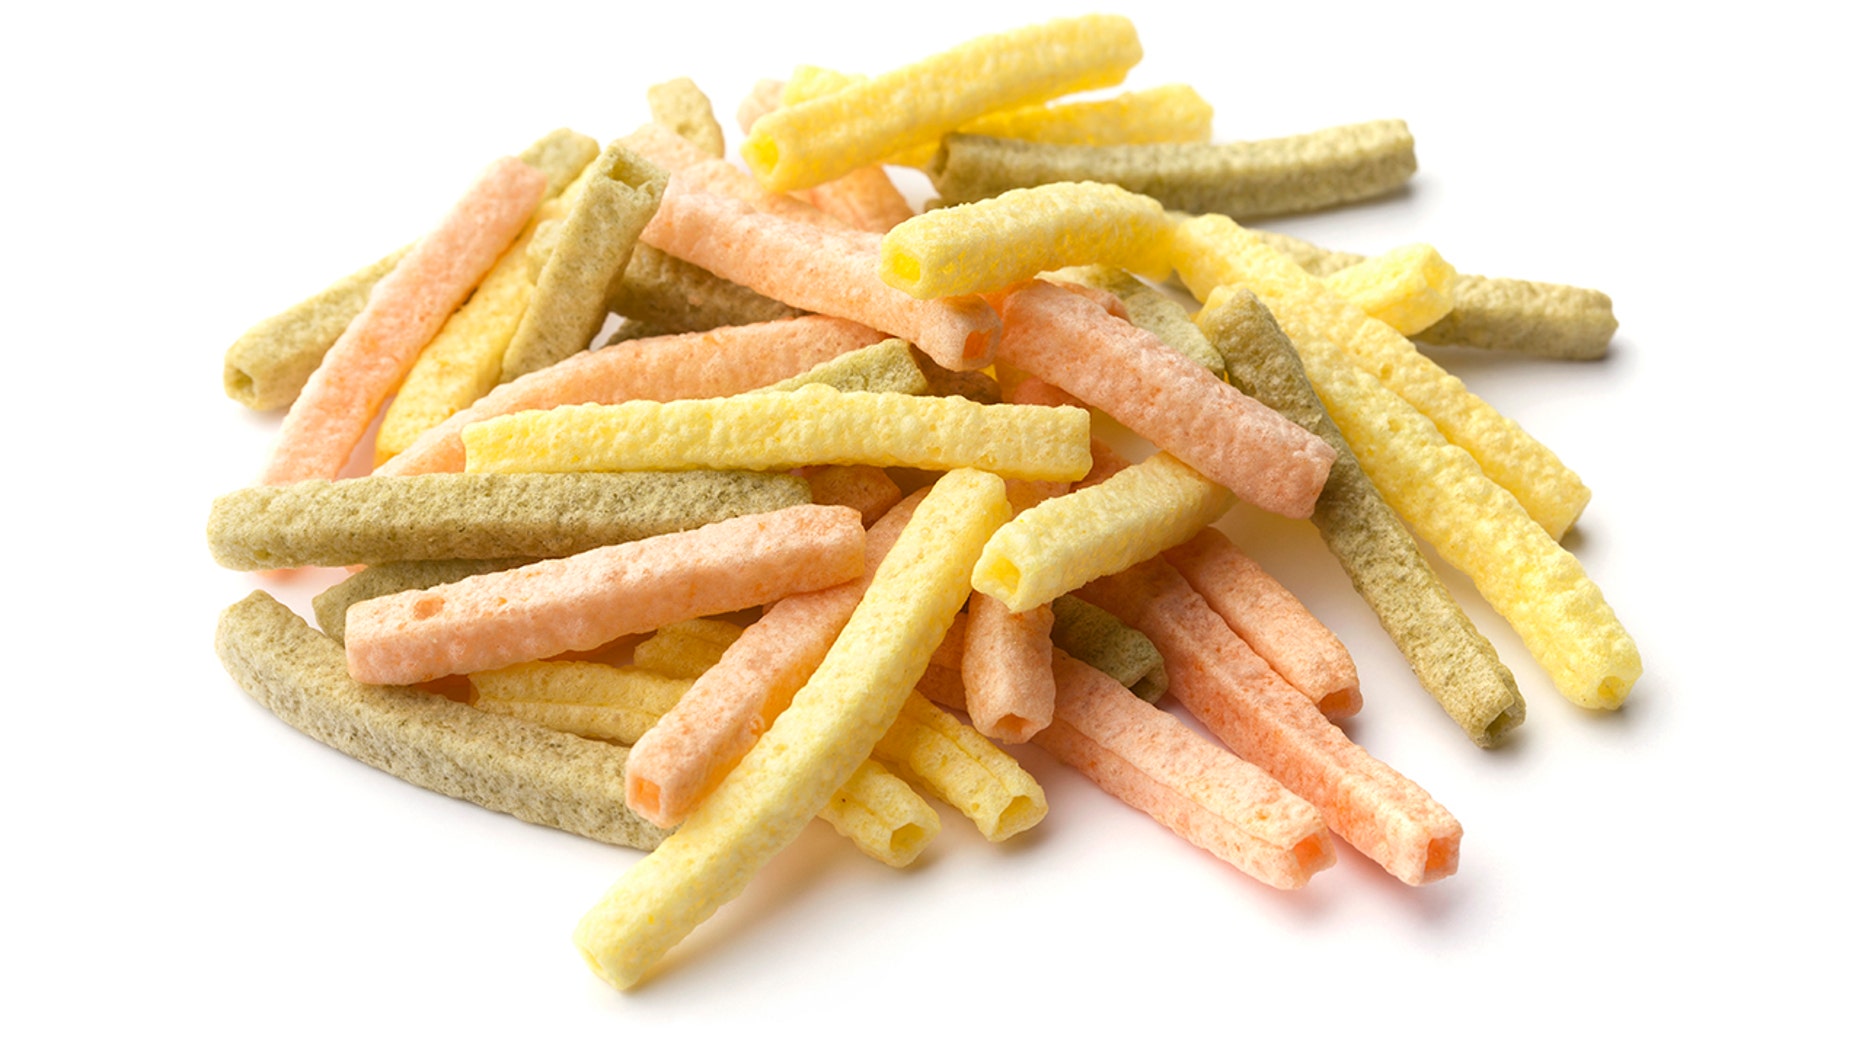 Veggie Straws don't have any veggies in them, claims lawsuit | Fox News